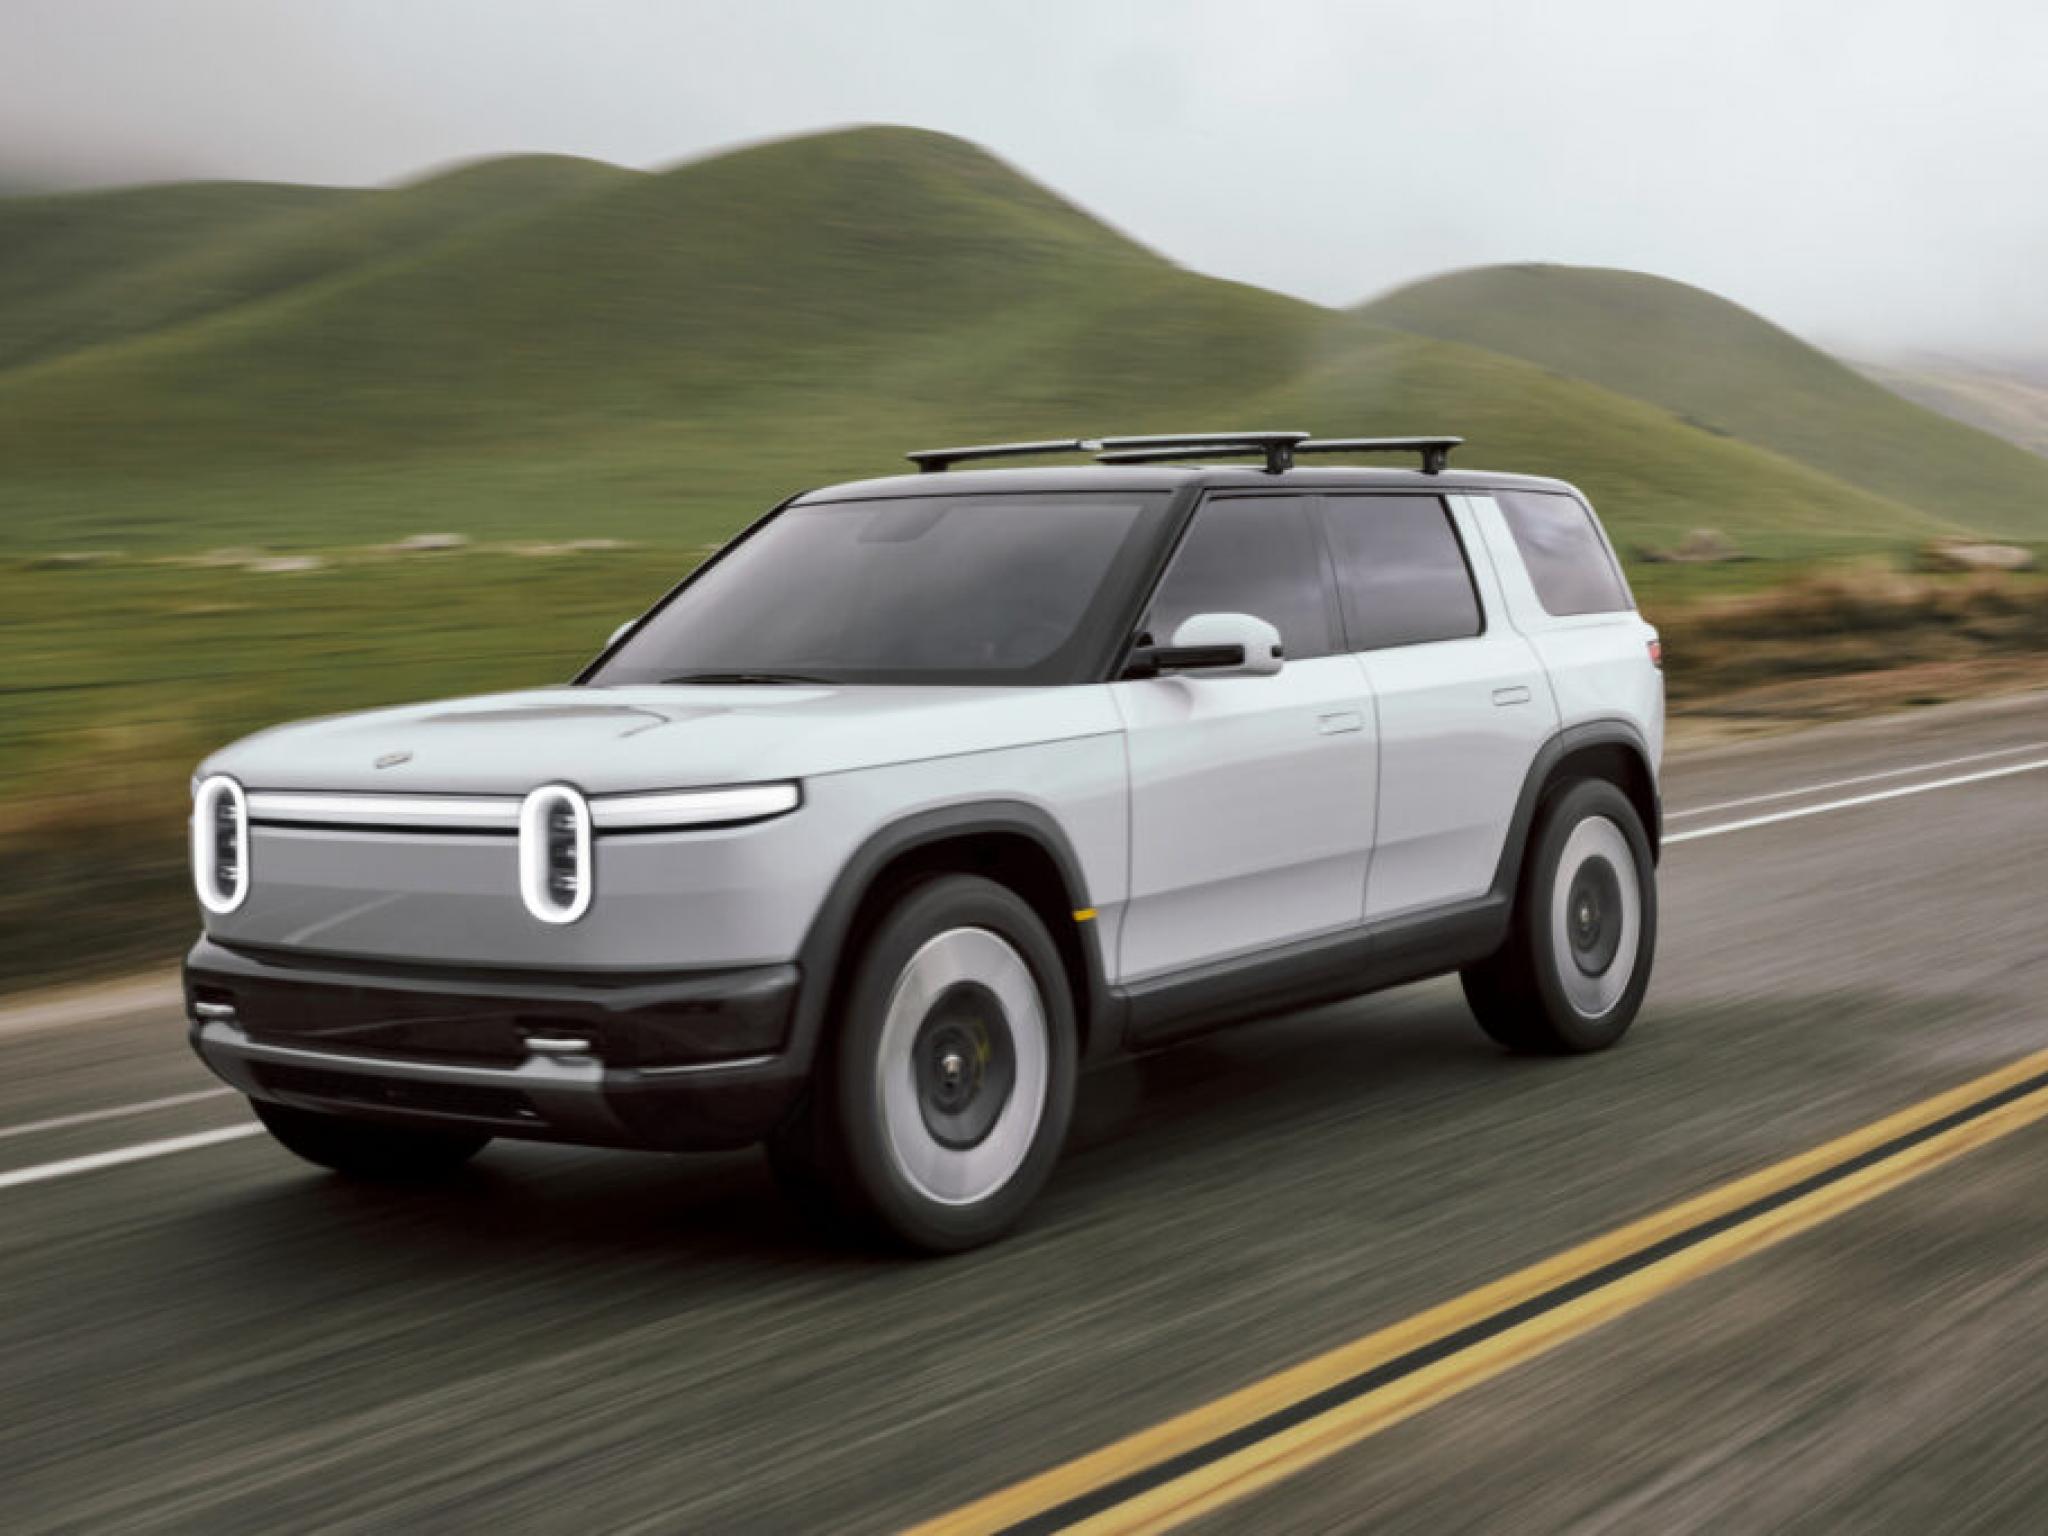  rivian-cancels-7-day-vehicle-return-policy-urges-customers-to-do-test-drives-and-walk-arounds-instead-updated 